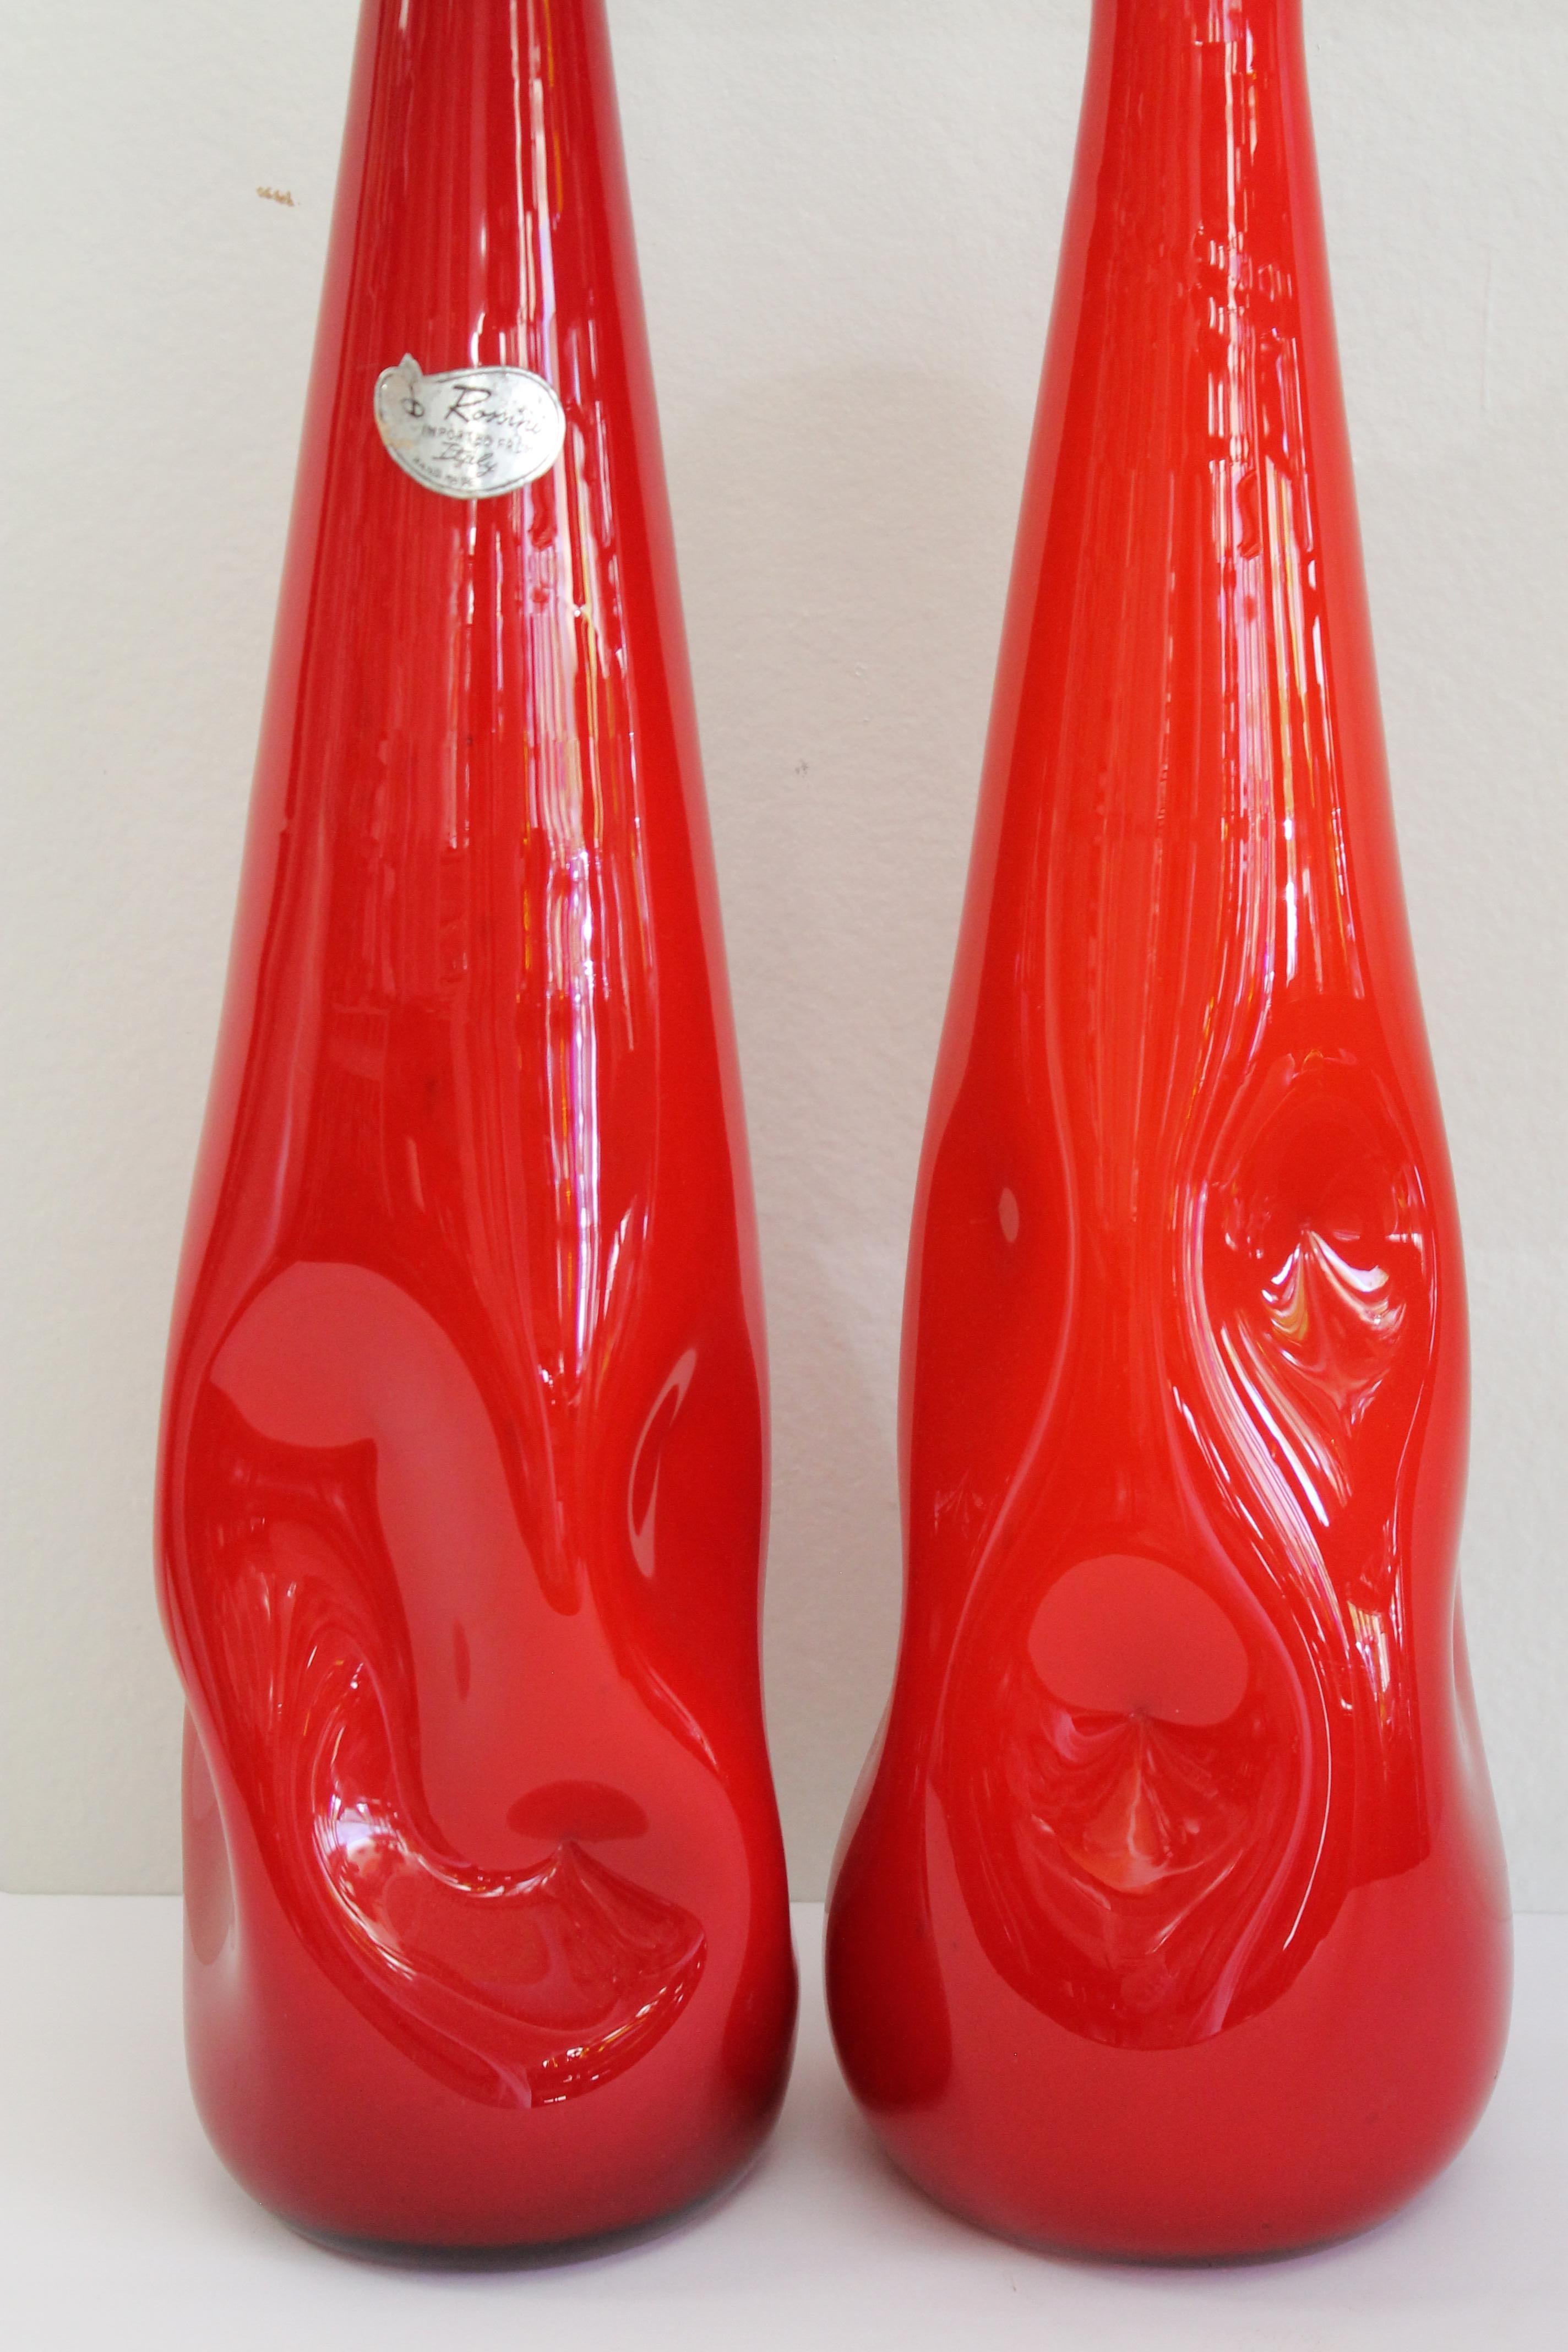 Pair of Italian cased red glass vases. Signed vase is a more red than the other. One vase is signed Rossini Imported From Italy Hand Made. Signed vase measures 21.75